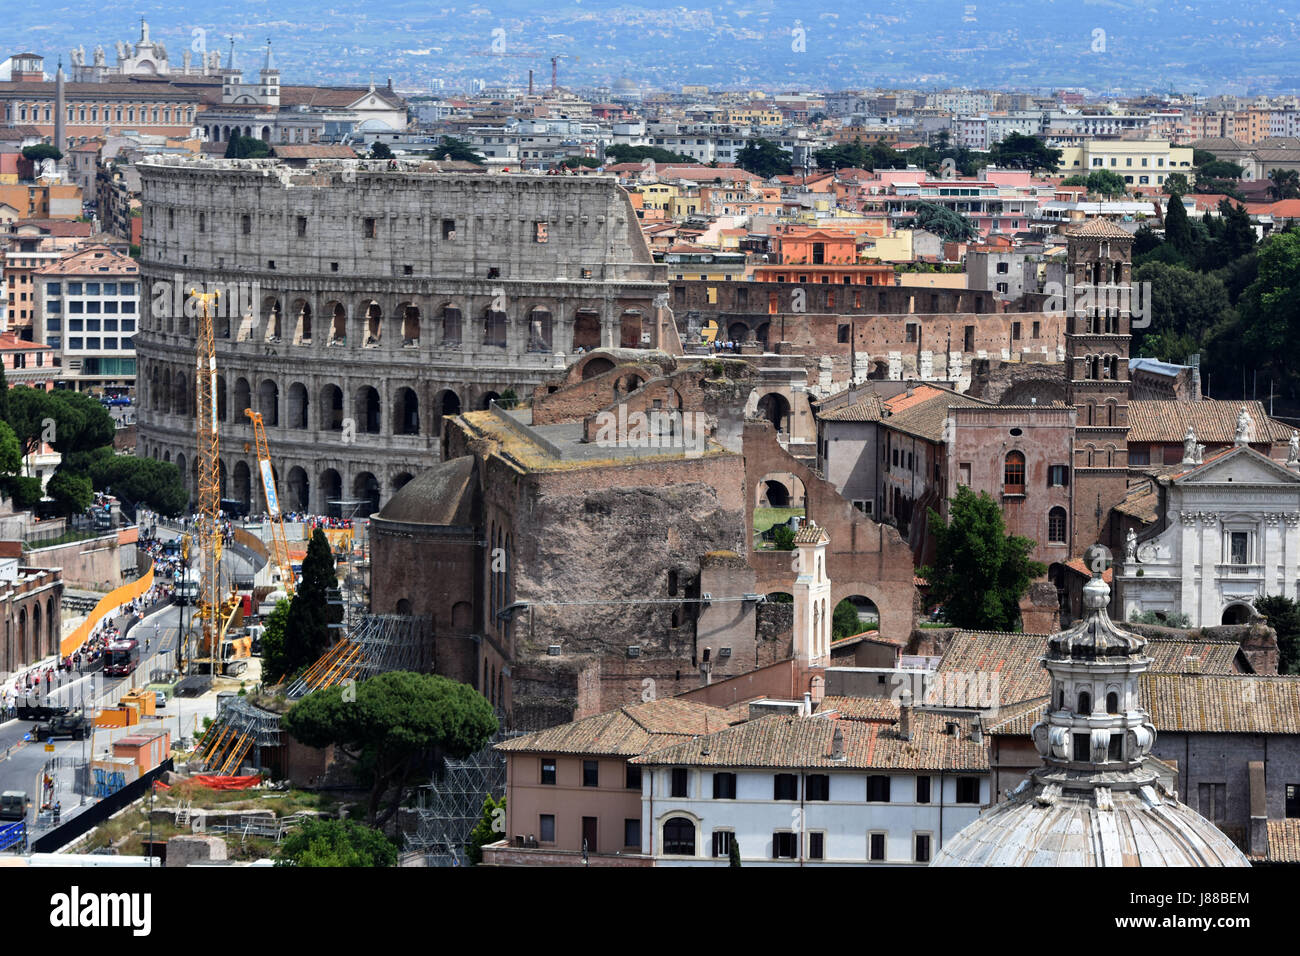 The Colosseum looks huge amongst the roof tops of Rome, Italy. Stock Photo